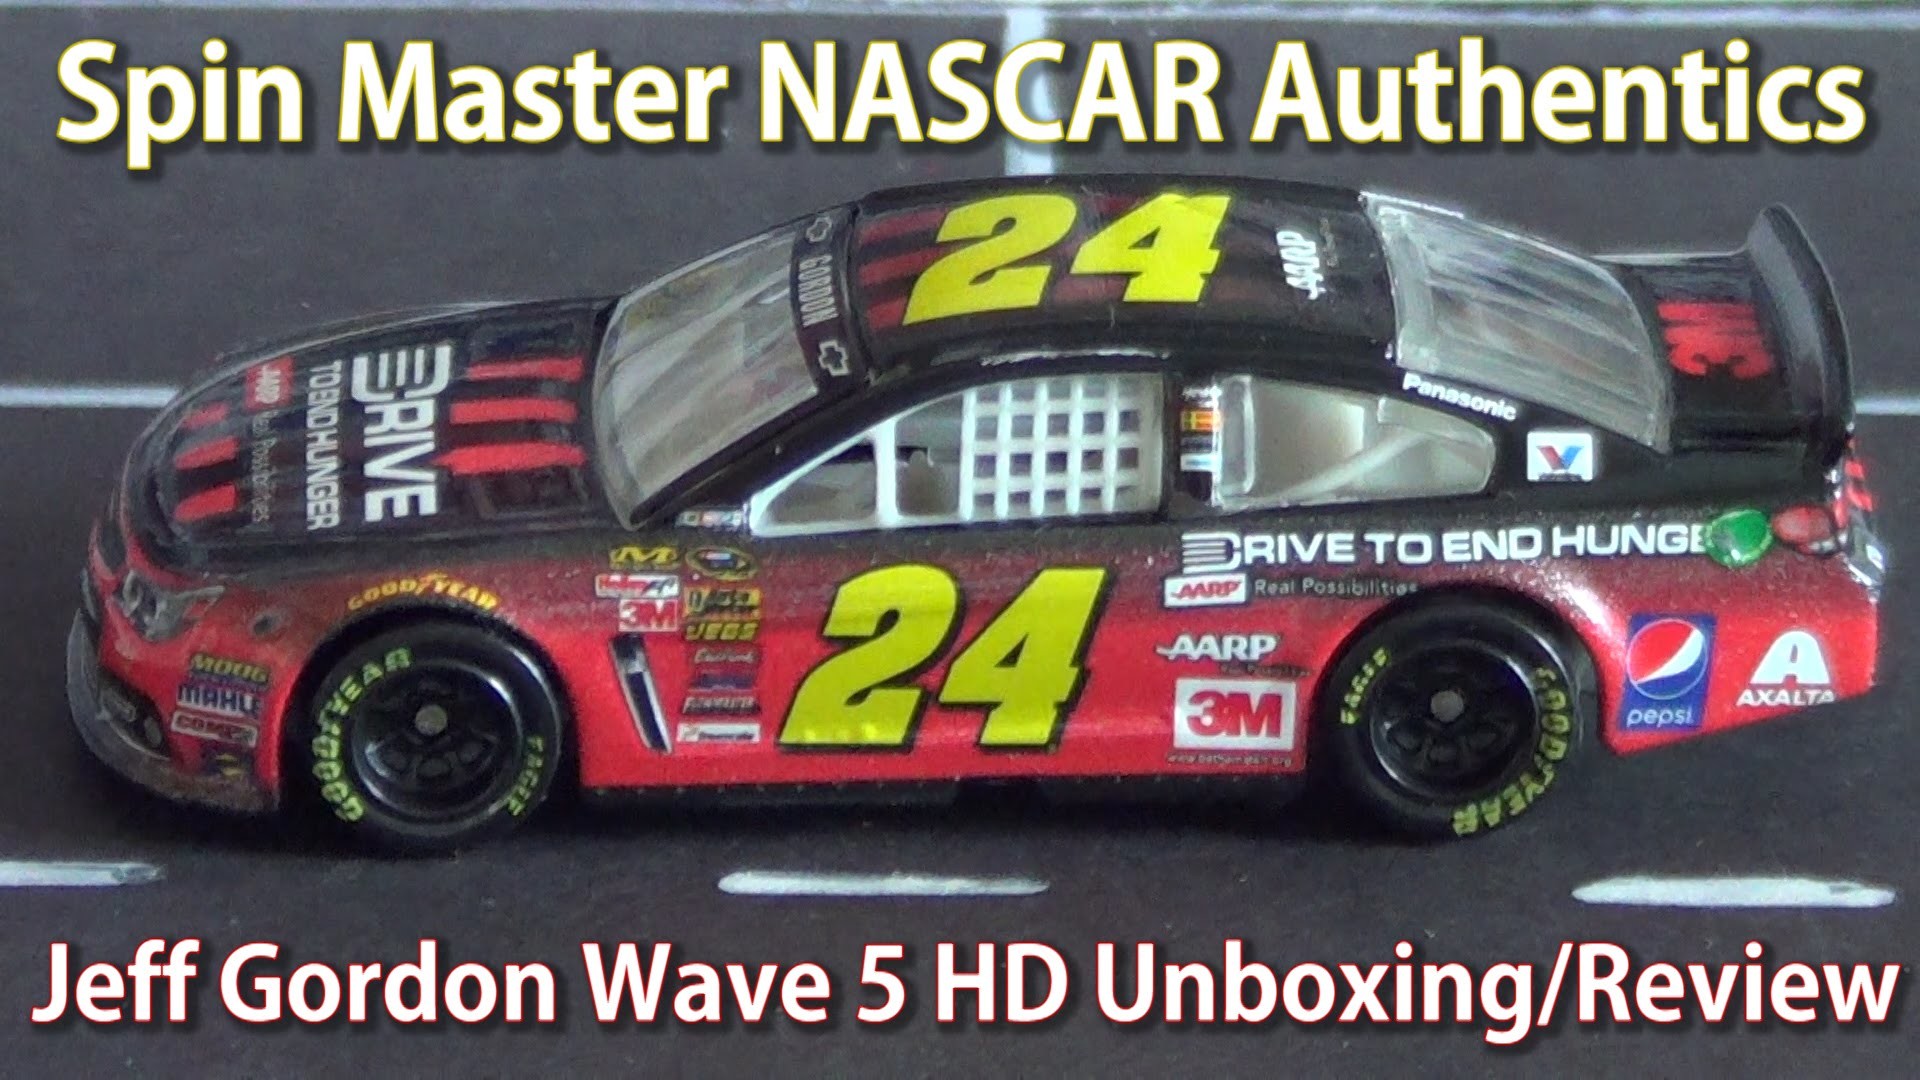 1920x1080 Spin Master NASCAR Authentics: The Ballad of the Jeff Gordon AARP DTEH  Unboxing/Review - YouTube